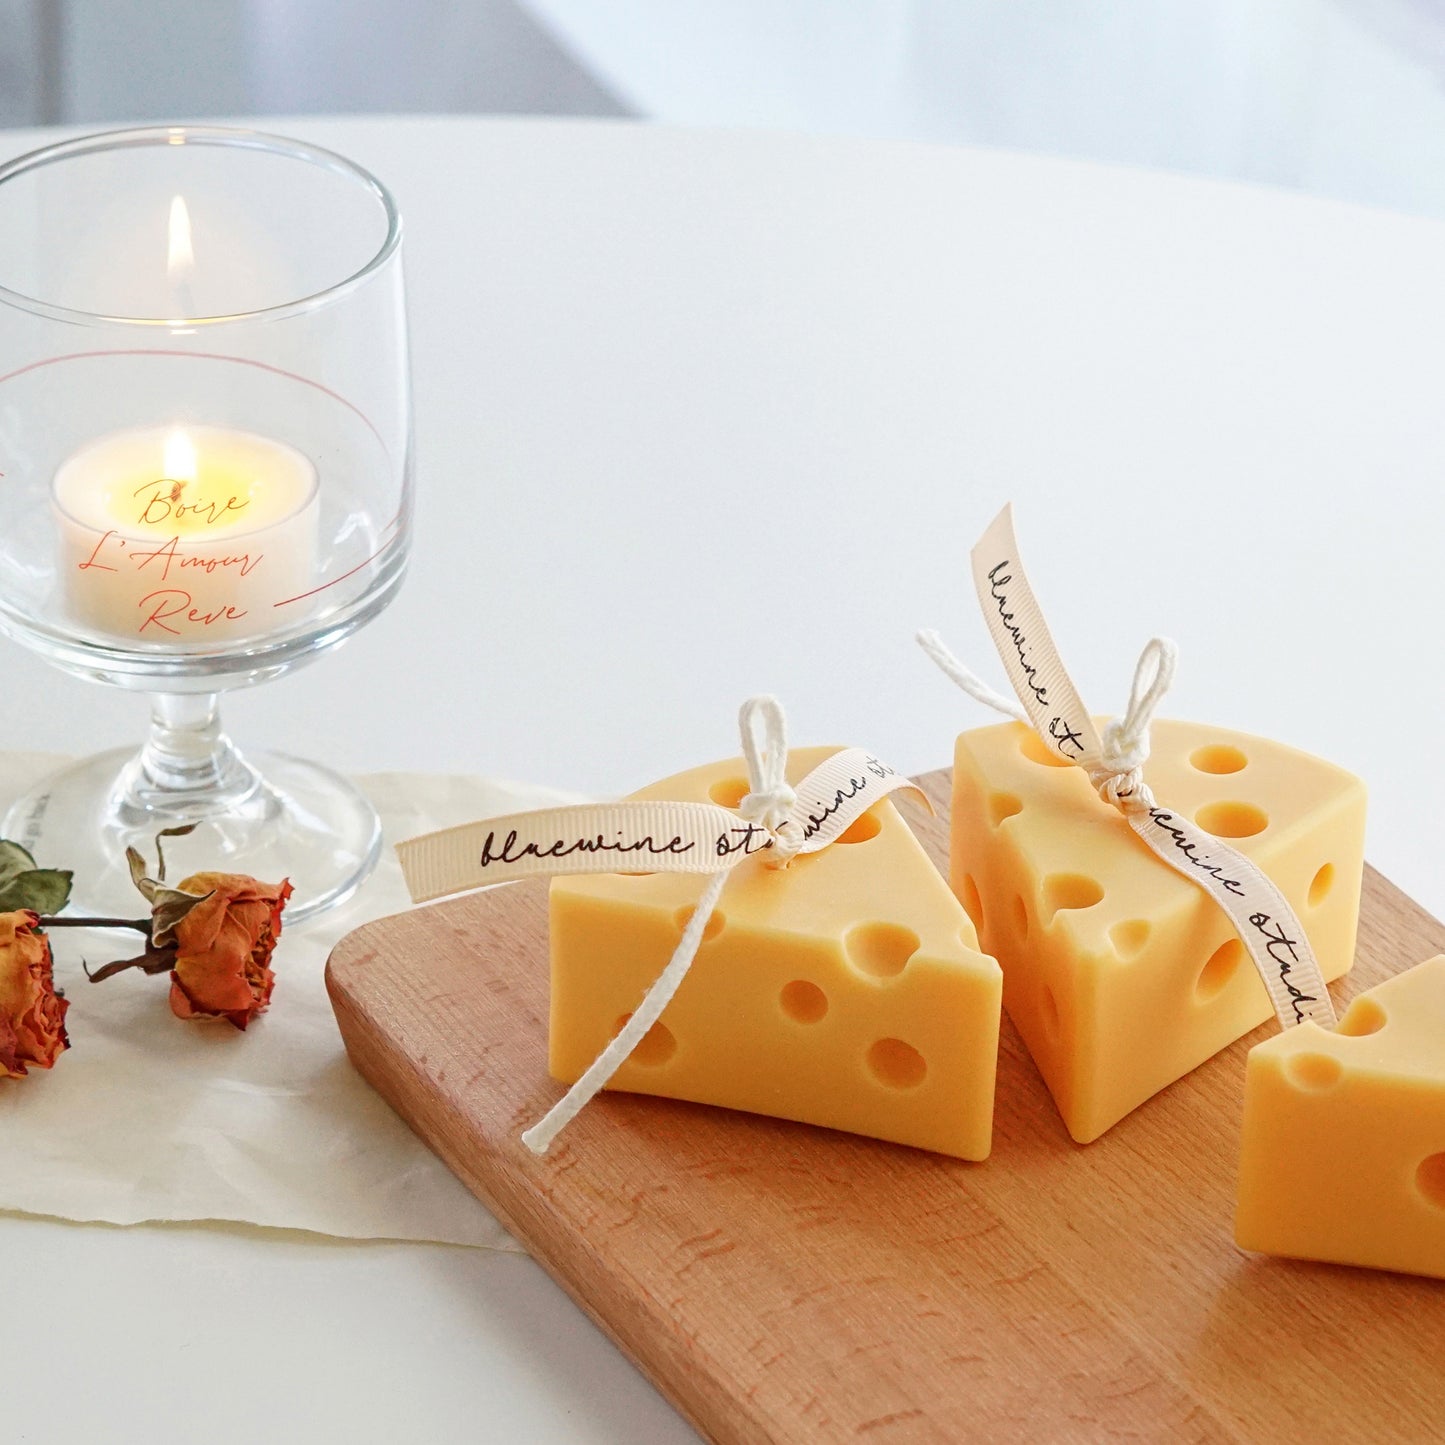 cheese soy pillar candles on wood board, dried flowers, and a lit tealight candle in a mini glass on white round table